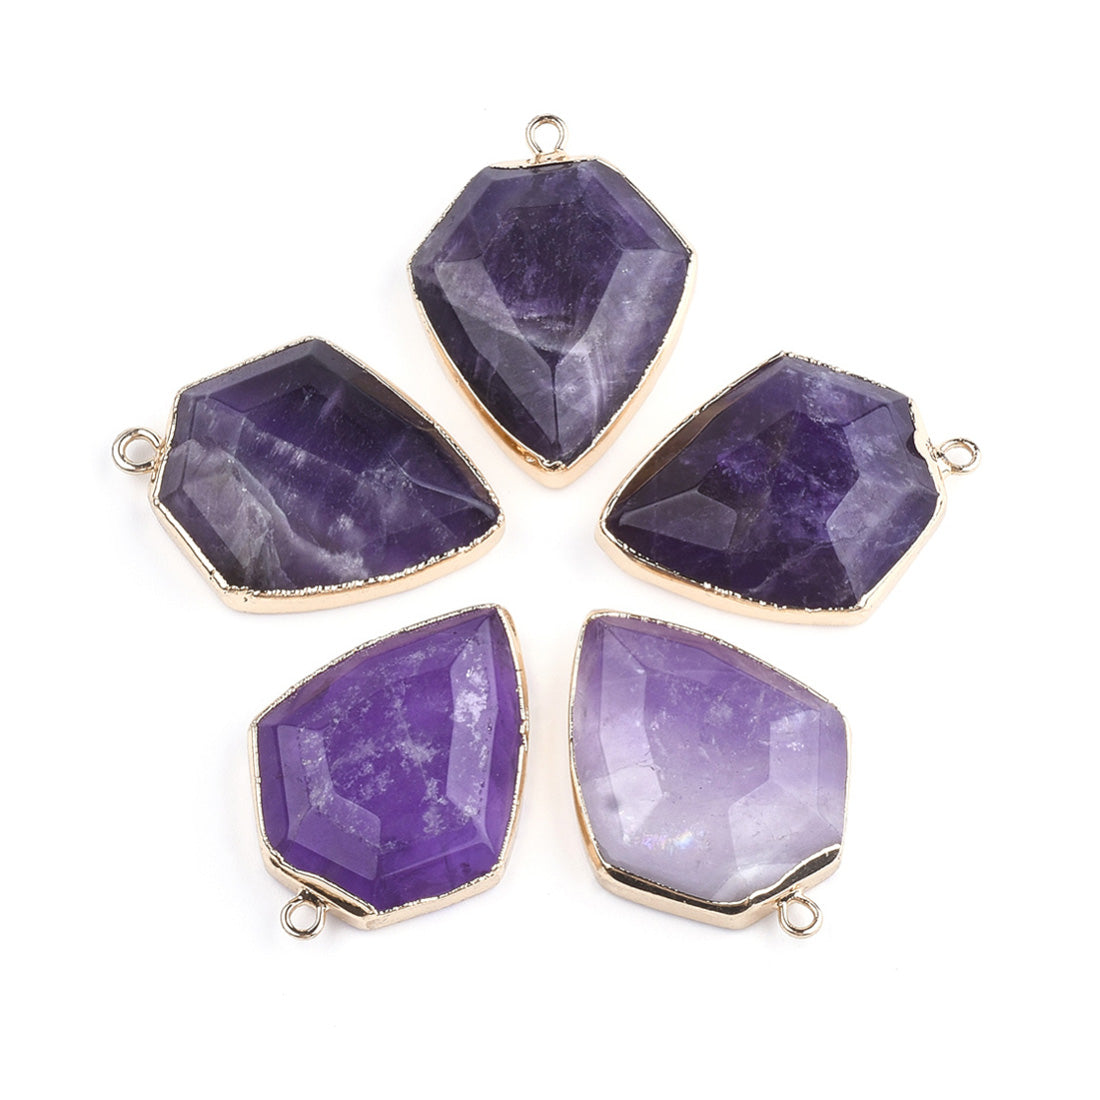 Collection of Semi precious stone pendants for diy jewelry making projects, stainless steel pendants; alloy pendants; cubic zirconia pendants; metal pendants; gemstone pendants; synthetic pendants; cheap pendant; affordable pendant